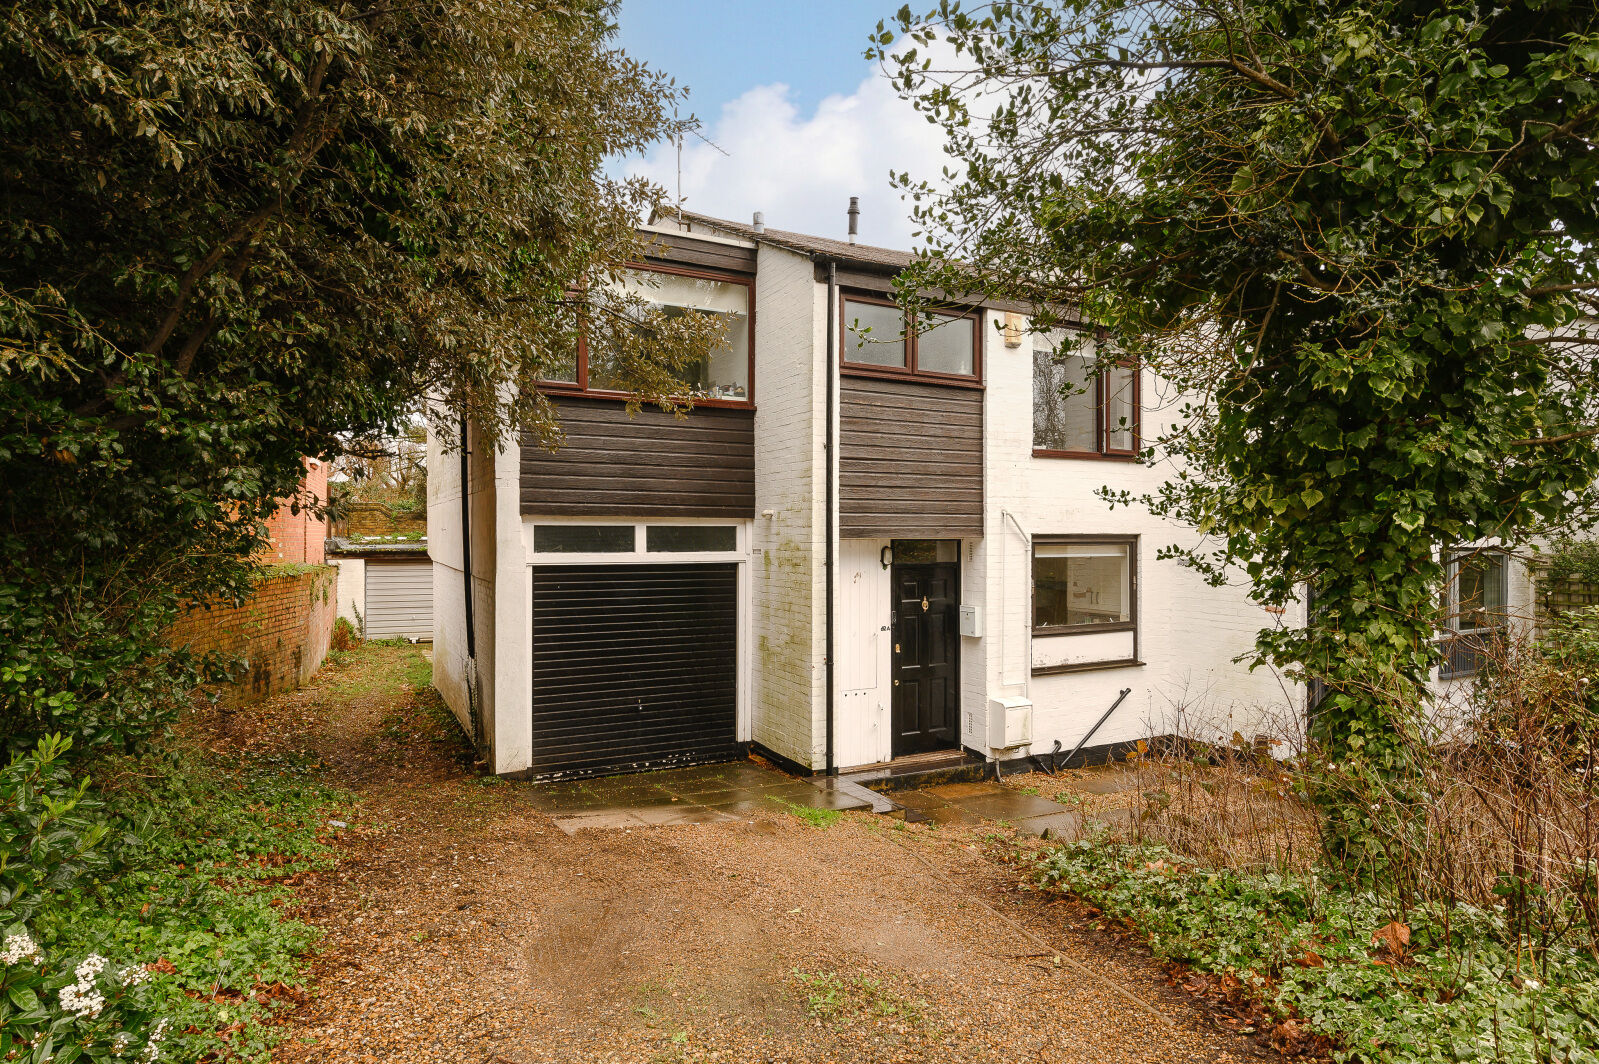 4 bedroom semi detached house for sale Leopold Road, Wimbledon, SW19, main image